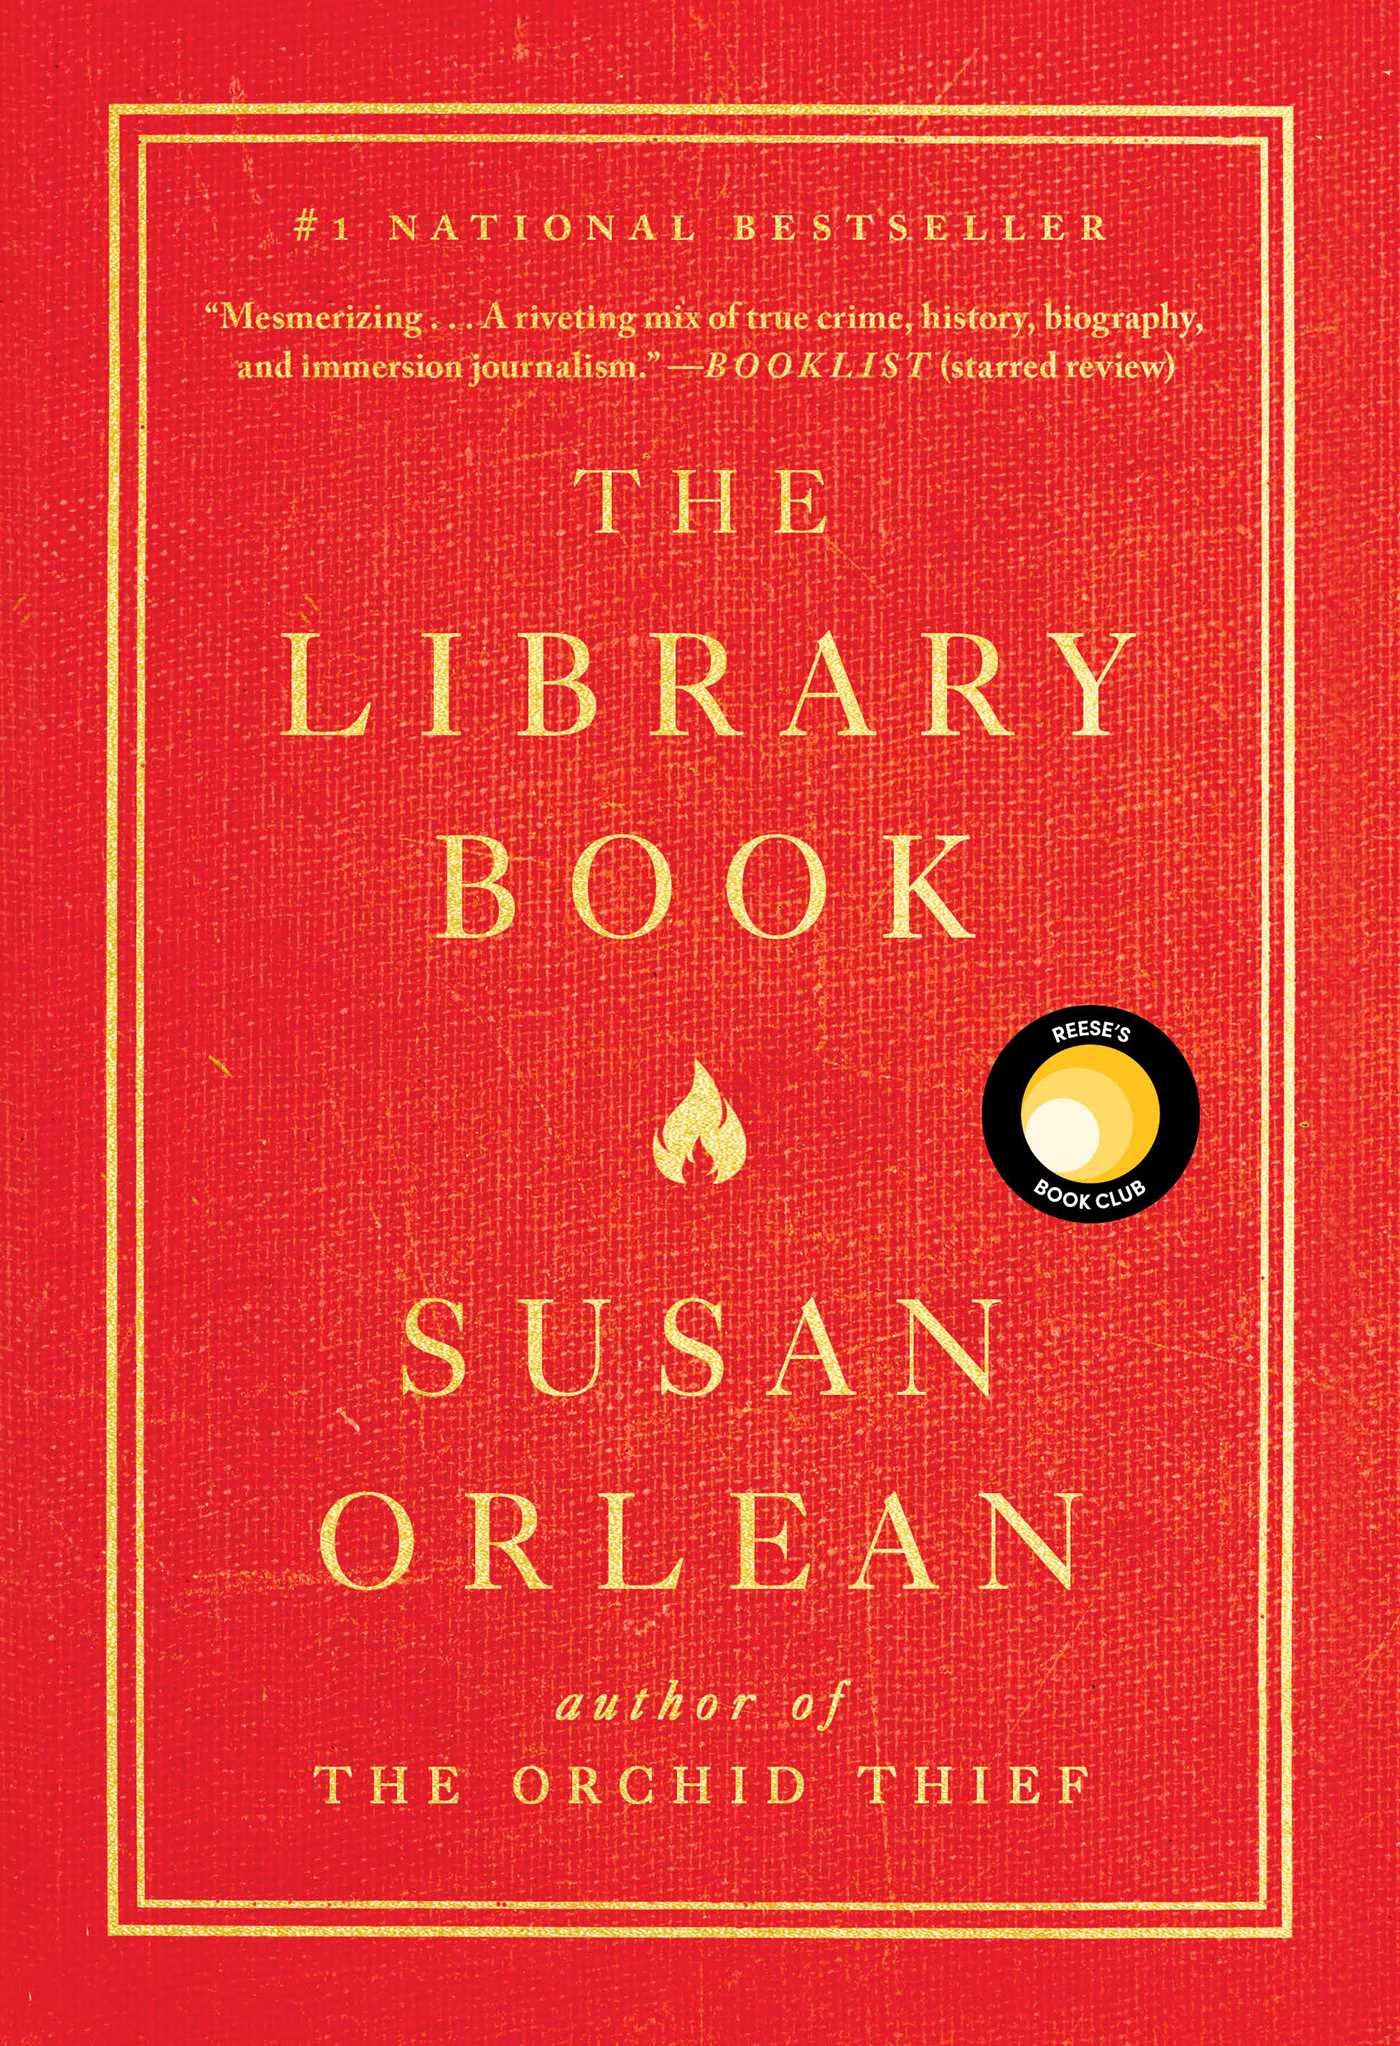 The Library Book by Susan Orlean.